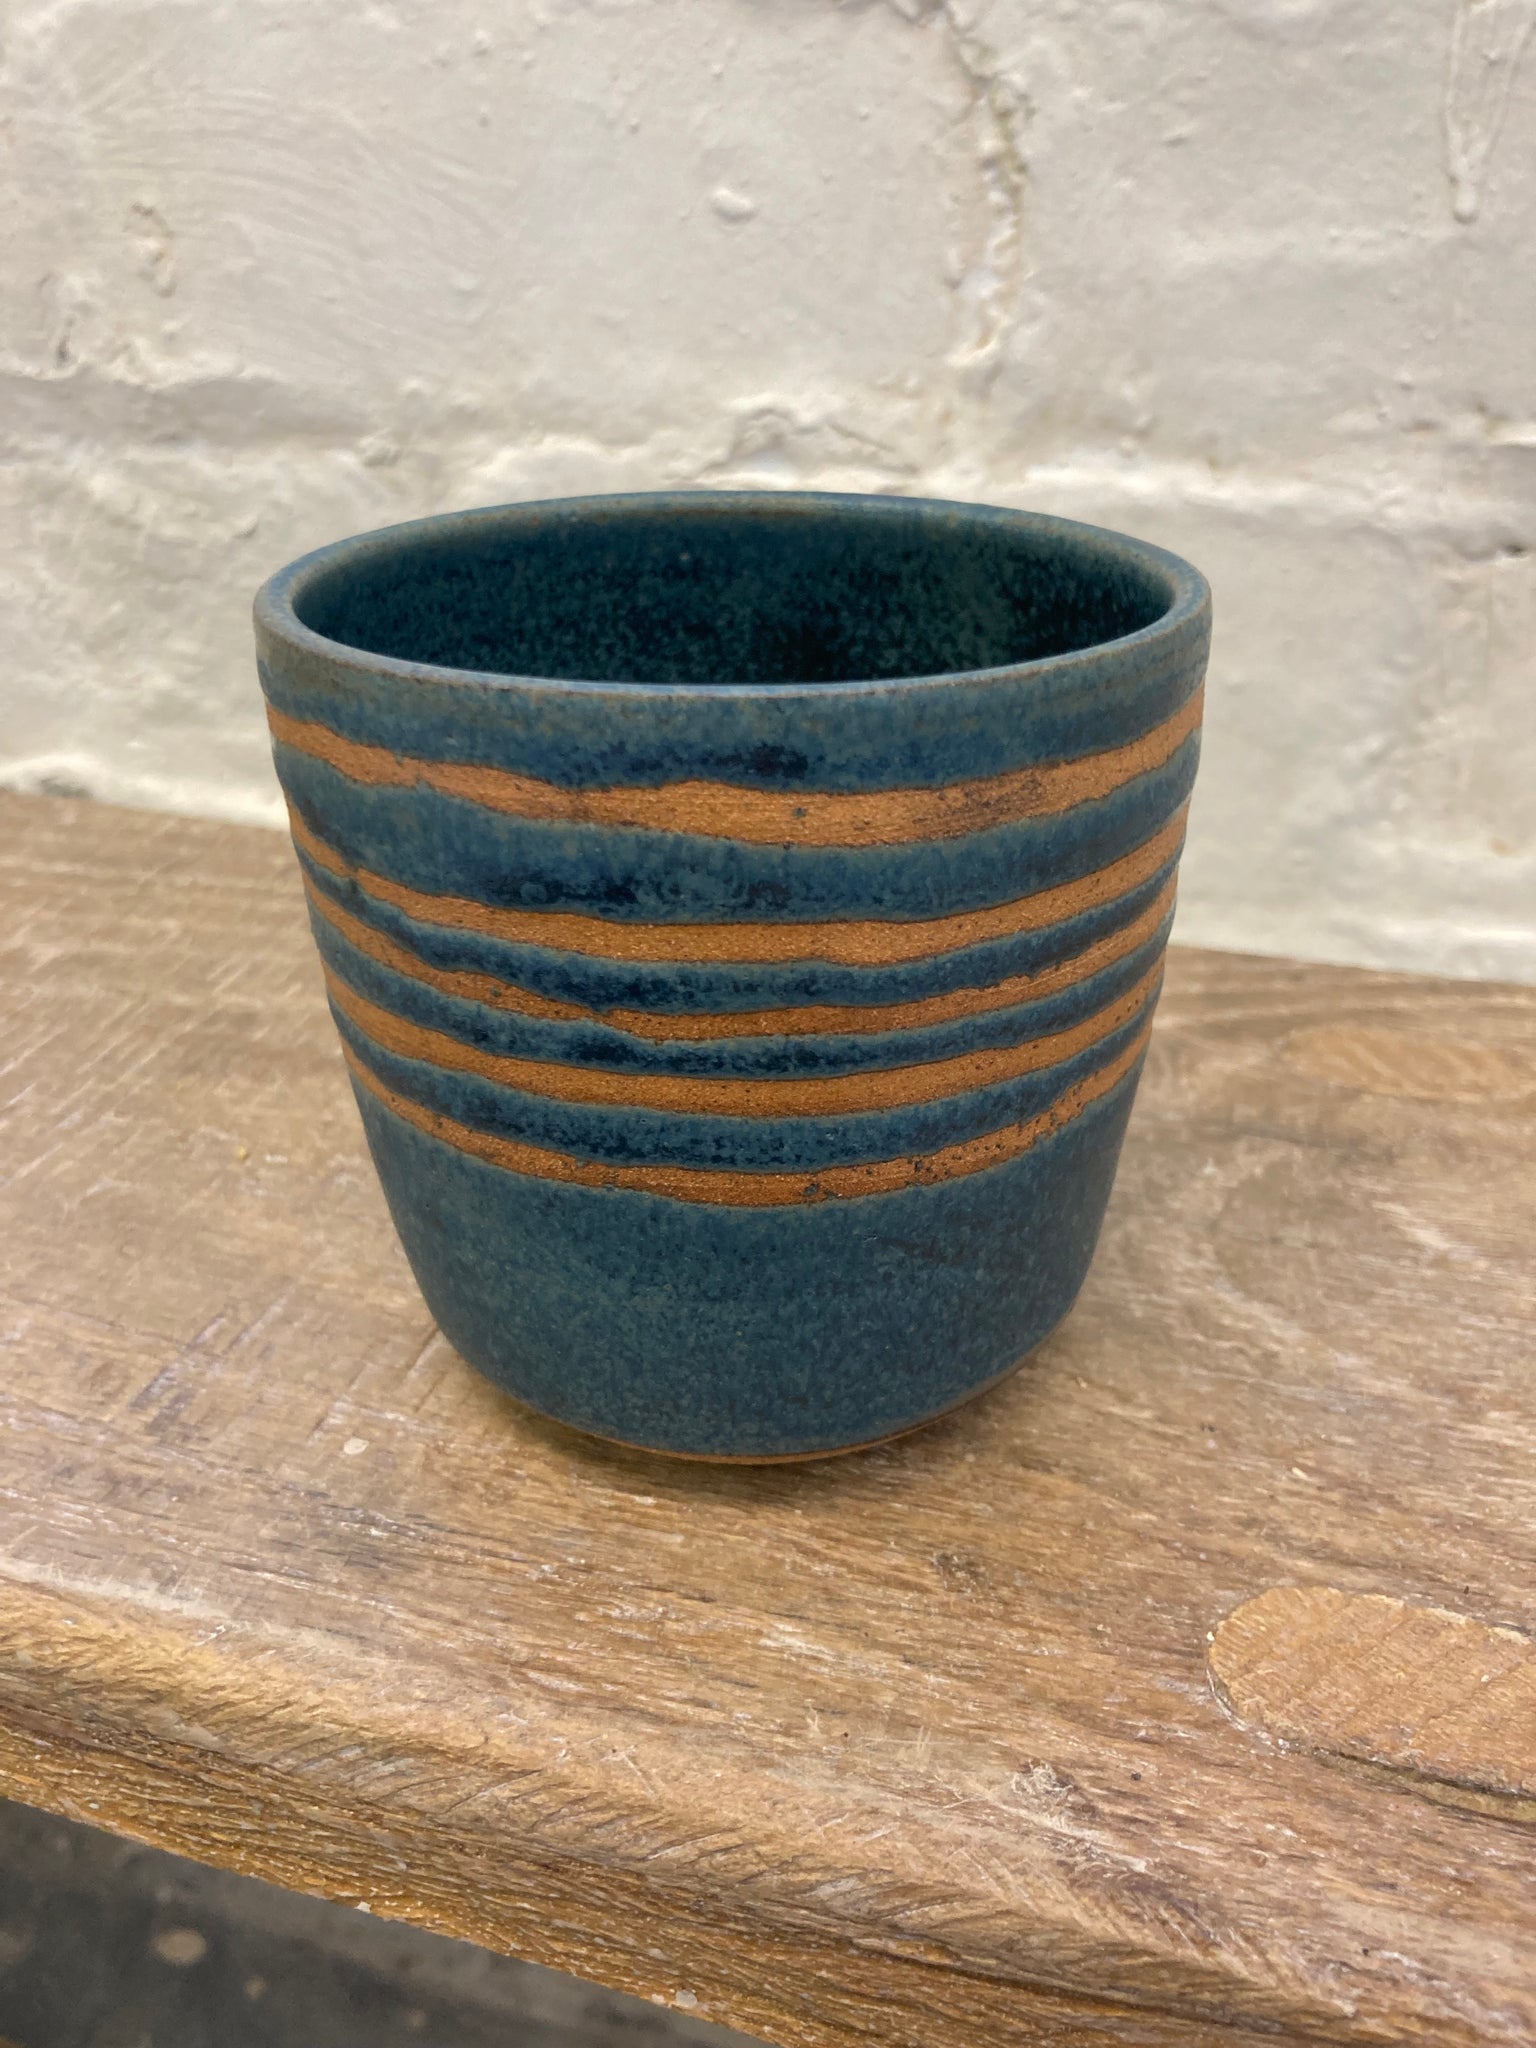 Cup - teal with stripes